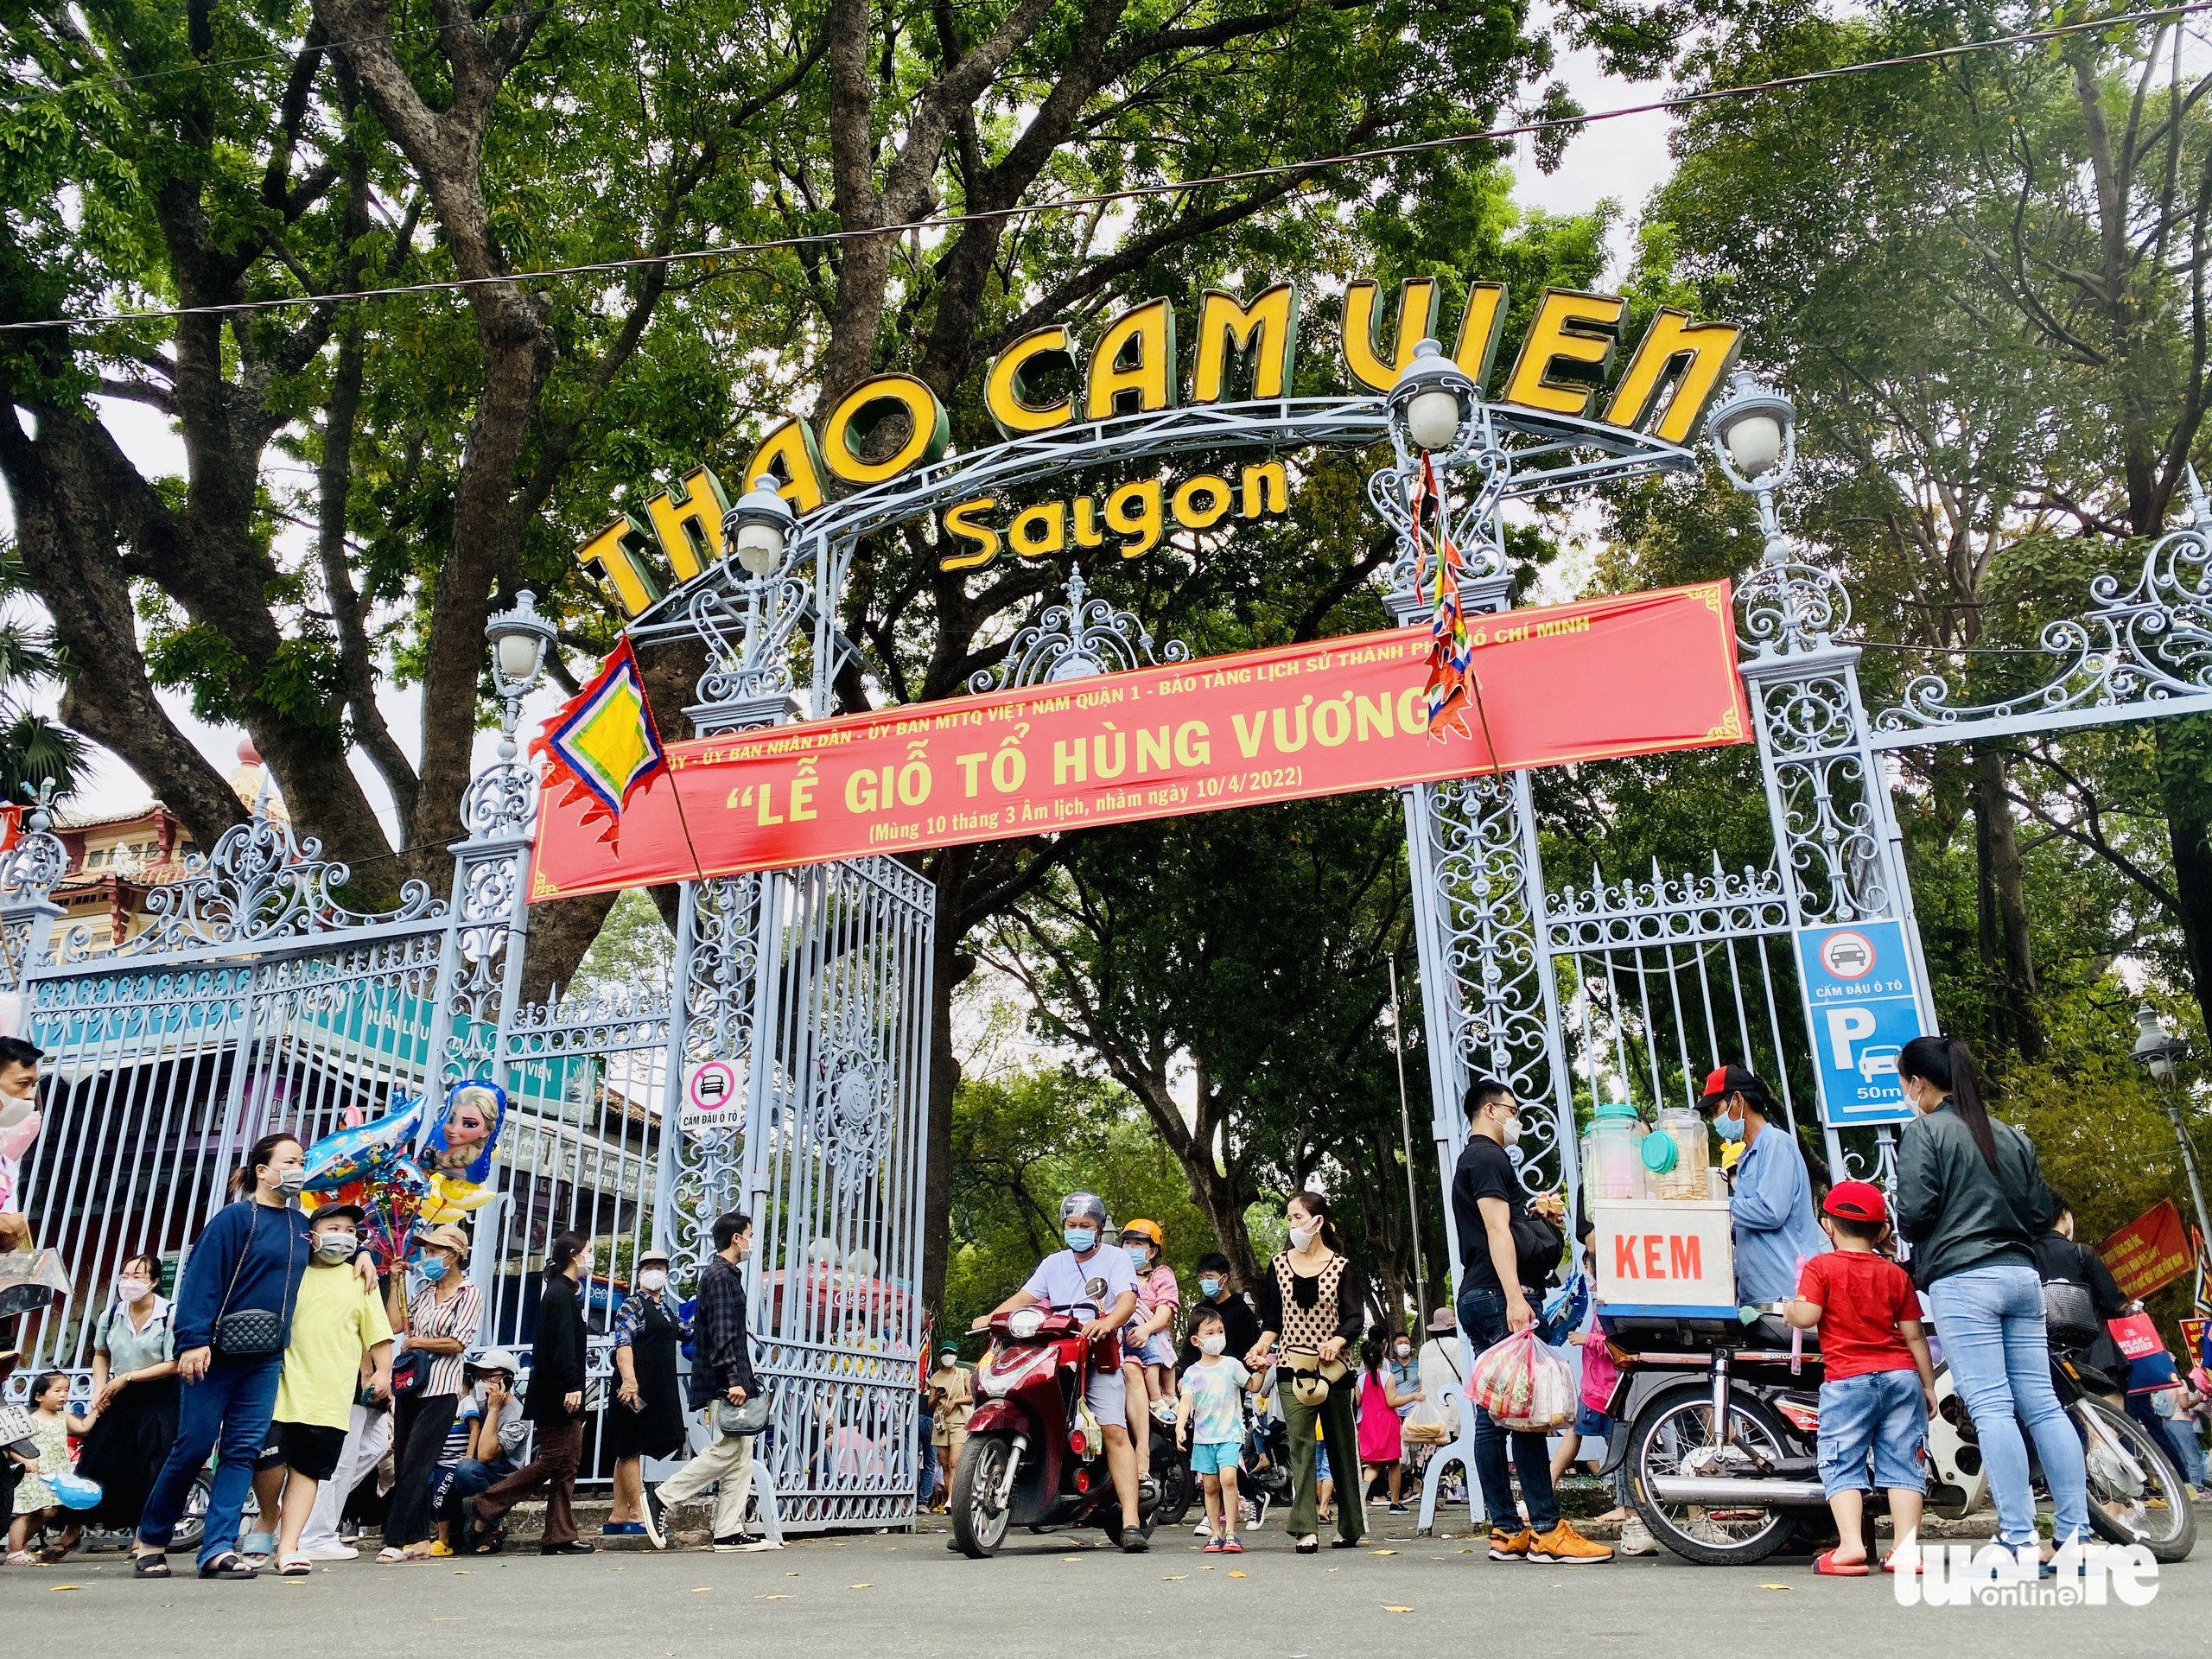 People visit the Saigon Zoo and Botanical Gardens in District 1, Ho Chi Minh City, April 10, 2022. Photo: Bong Mai / Tuoi Tre